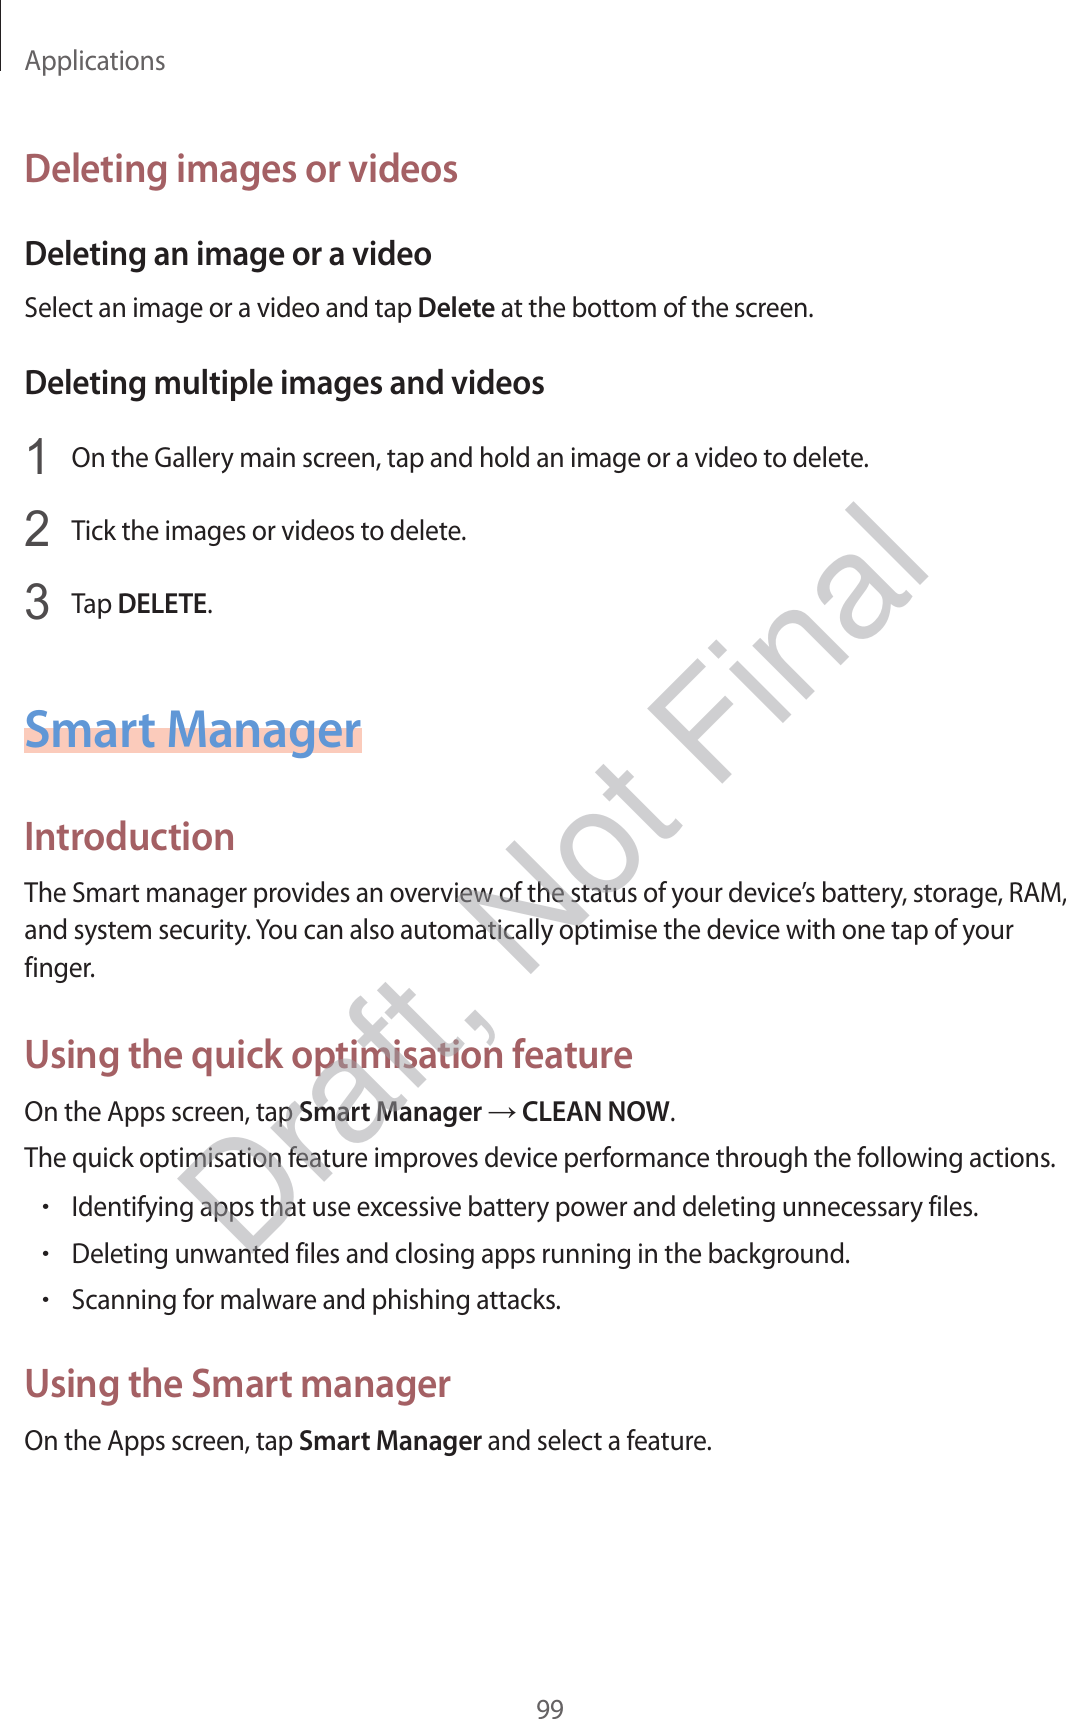 Applications99Deleting images or videosDeleting an image or a videoSelect an image or a video and tap Delete at the bottom of the screen.Deleting multiple images and videos1  On the Gallery main screen, tap and hold an image or a video to delete.2  Tick the images or videos to delete.3  Tap DELETE.Smart ManagerIntroductionThe Smart manager provides an overview of the status of your device’s battery, storage, RAM, and system security. You can also automatically optimise the device with one tap of your finger.Using the quick optimisation featureOn the Apps screen, tap Smart Manager  CLEAN NOW.The quick optimisation feature improves device performance through the following actions.•Identifying apps that use excessive battery power and deleting unnecessary files.•Deleting unwanted files and closing apps running in the background.•Scanning for malware and phishing attacks.Using the Smart managerOn the Apps screen, tap Smart Manager and select a feature.Draft, Not Final